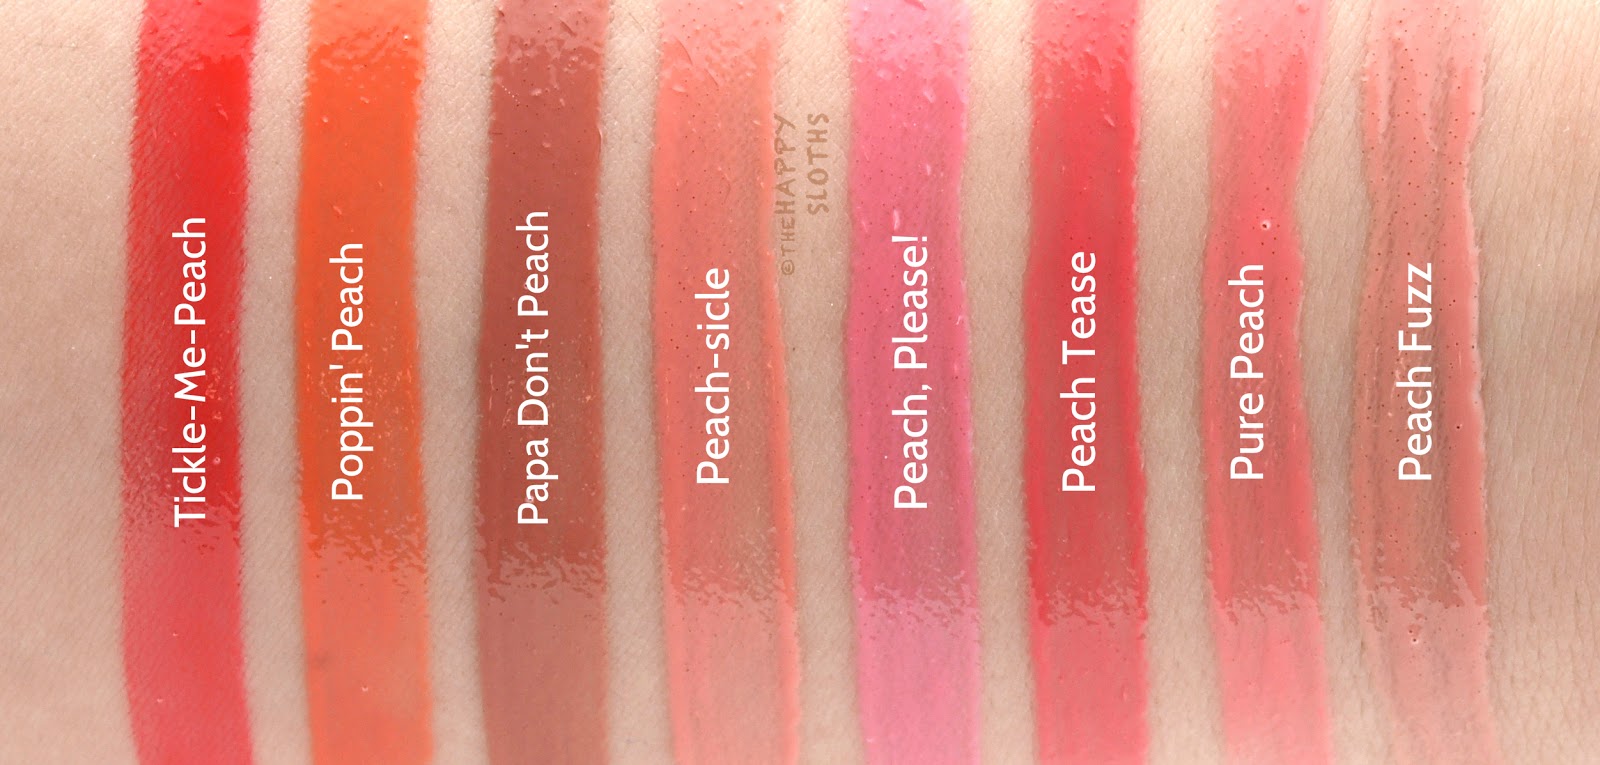 Too Faced Sweet Peach Creamy Peach Oil Lip Gloss: Review and Swatches